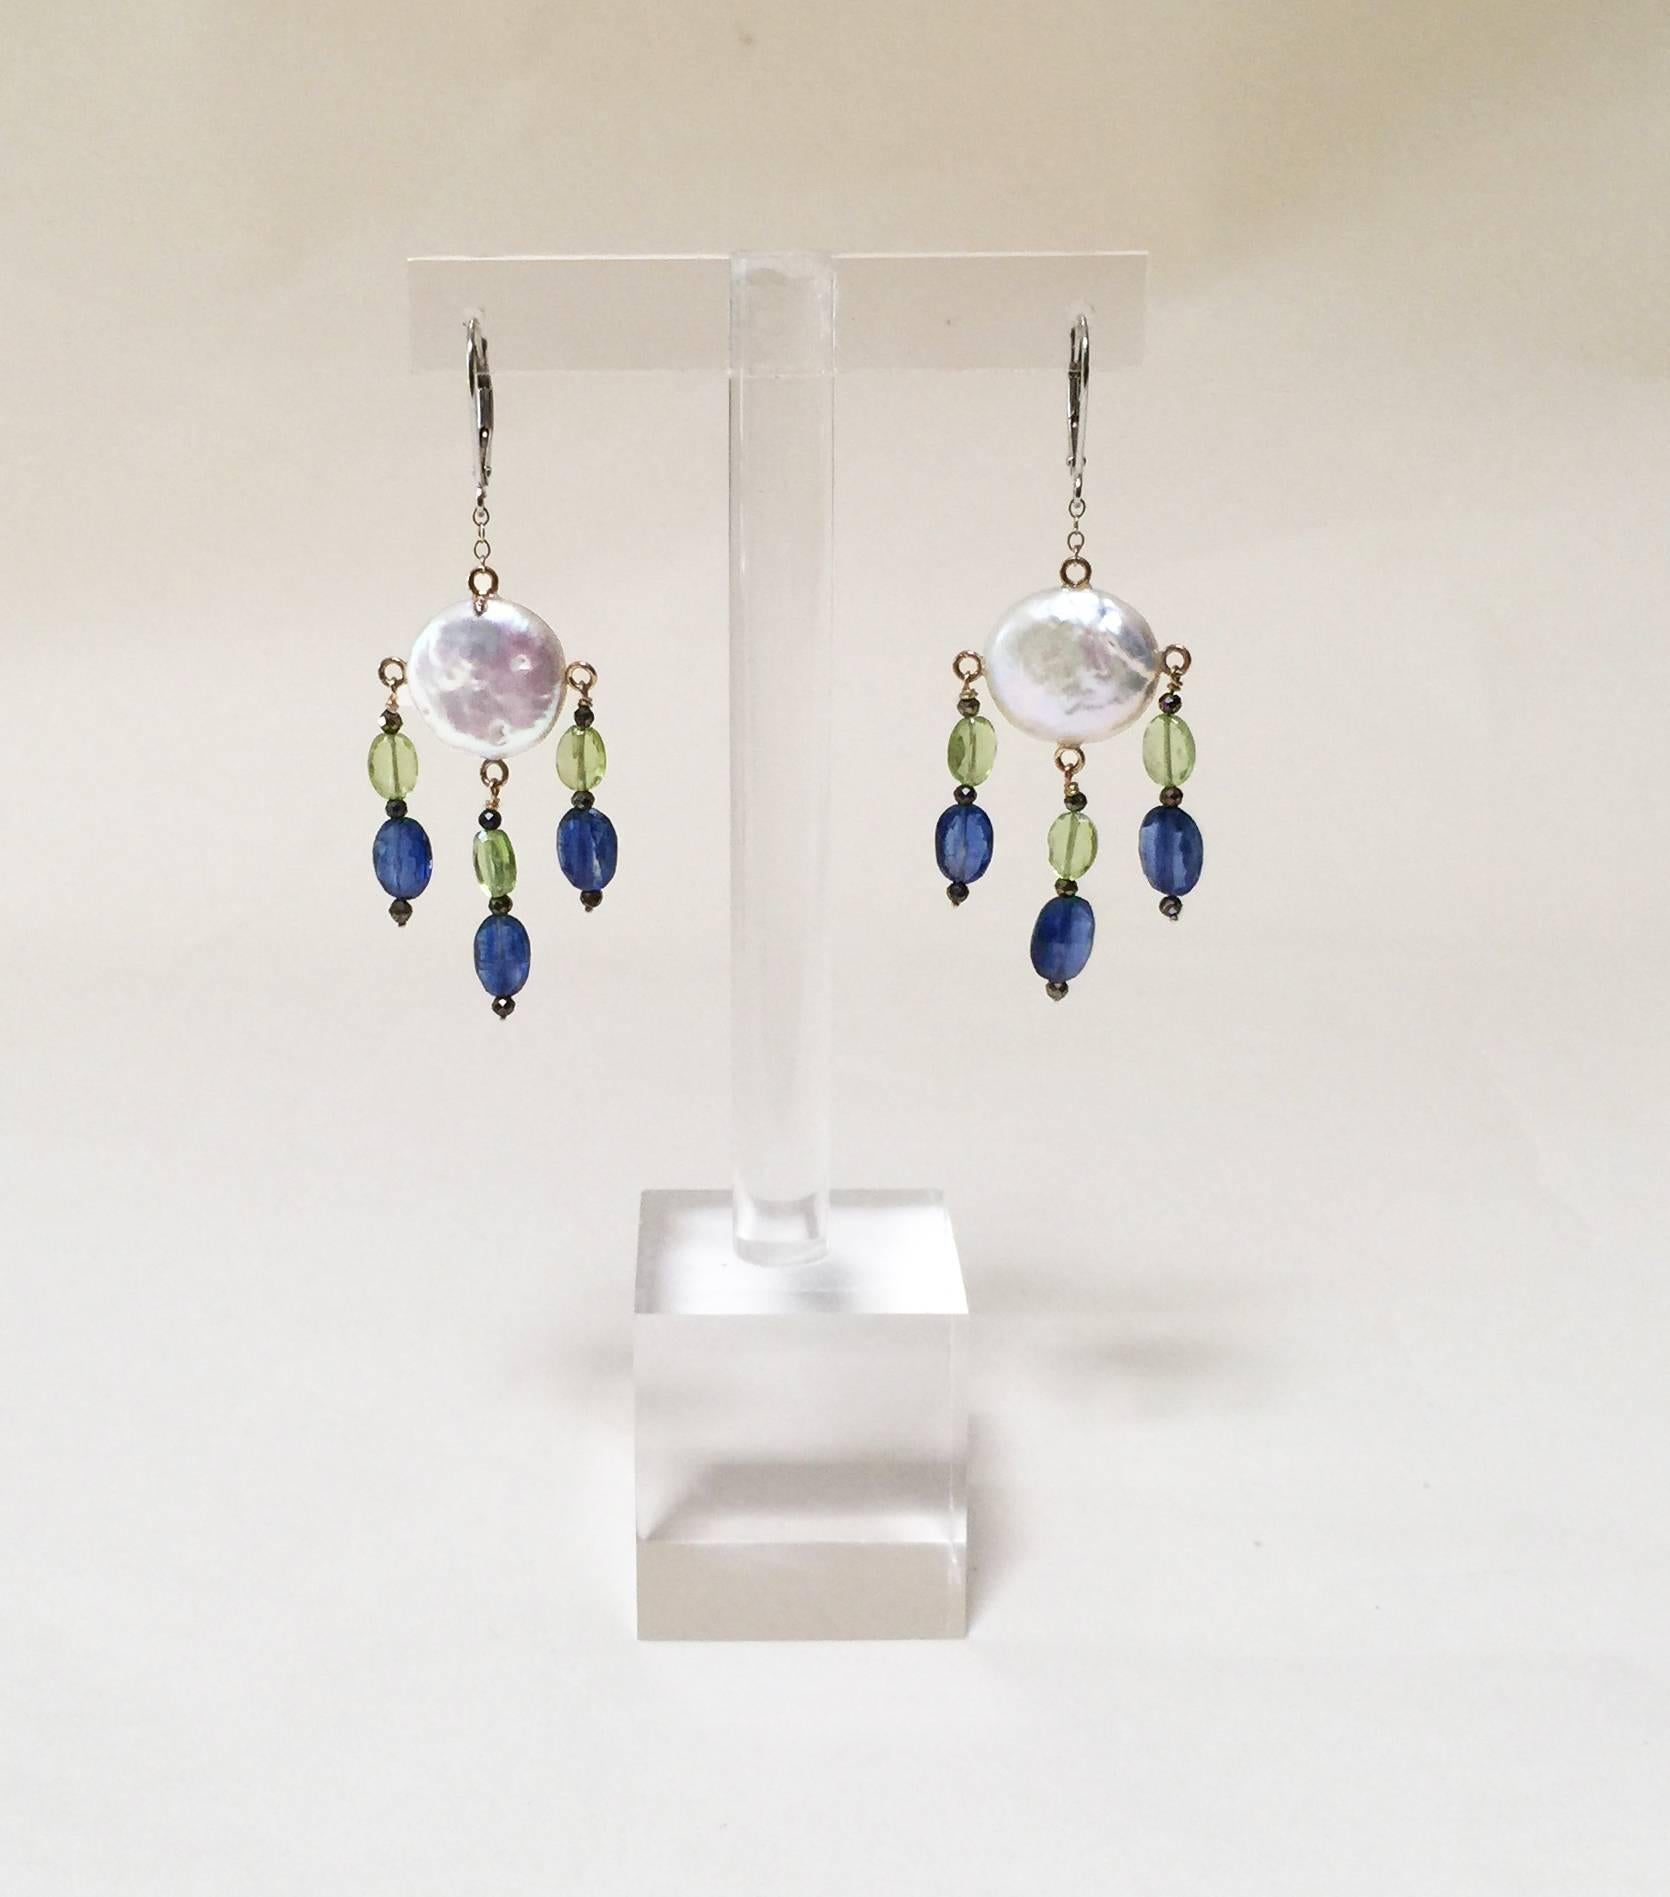 Gorgeous pair of Chandelier Earrings by Marina J. This elegant pair features a faceted Peridot, Kyanite and Black Spinel adorning a Baroque White Coin Pearl. The Pearl displays a stunning iridescent luster which perfectly compliments the multi